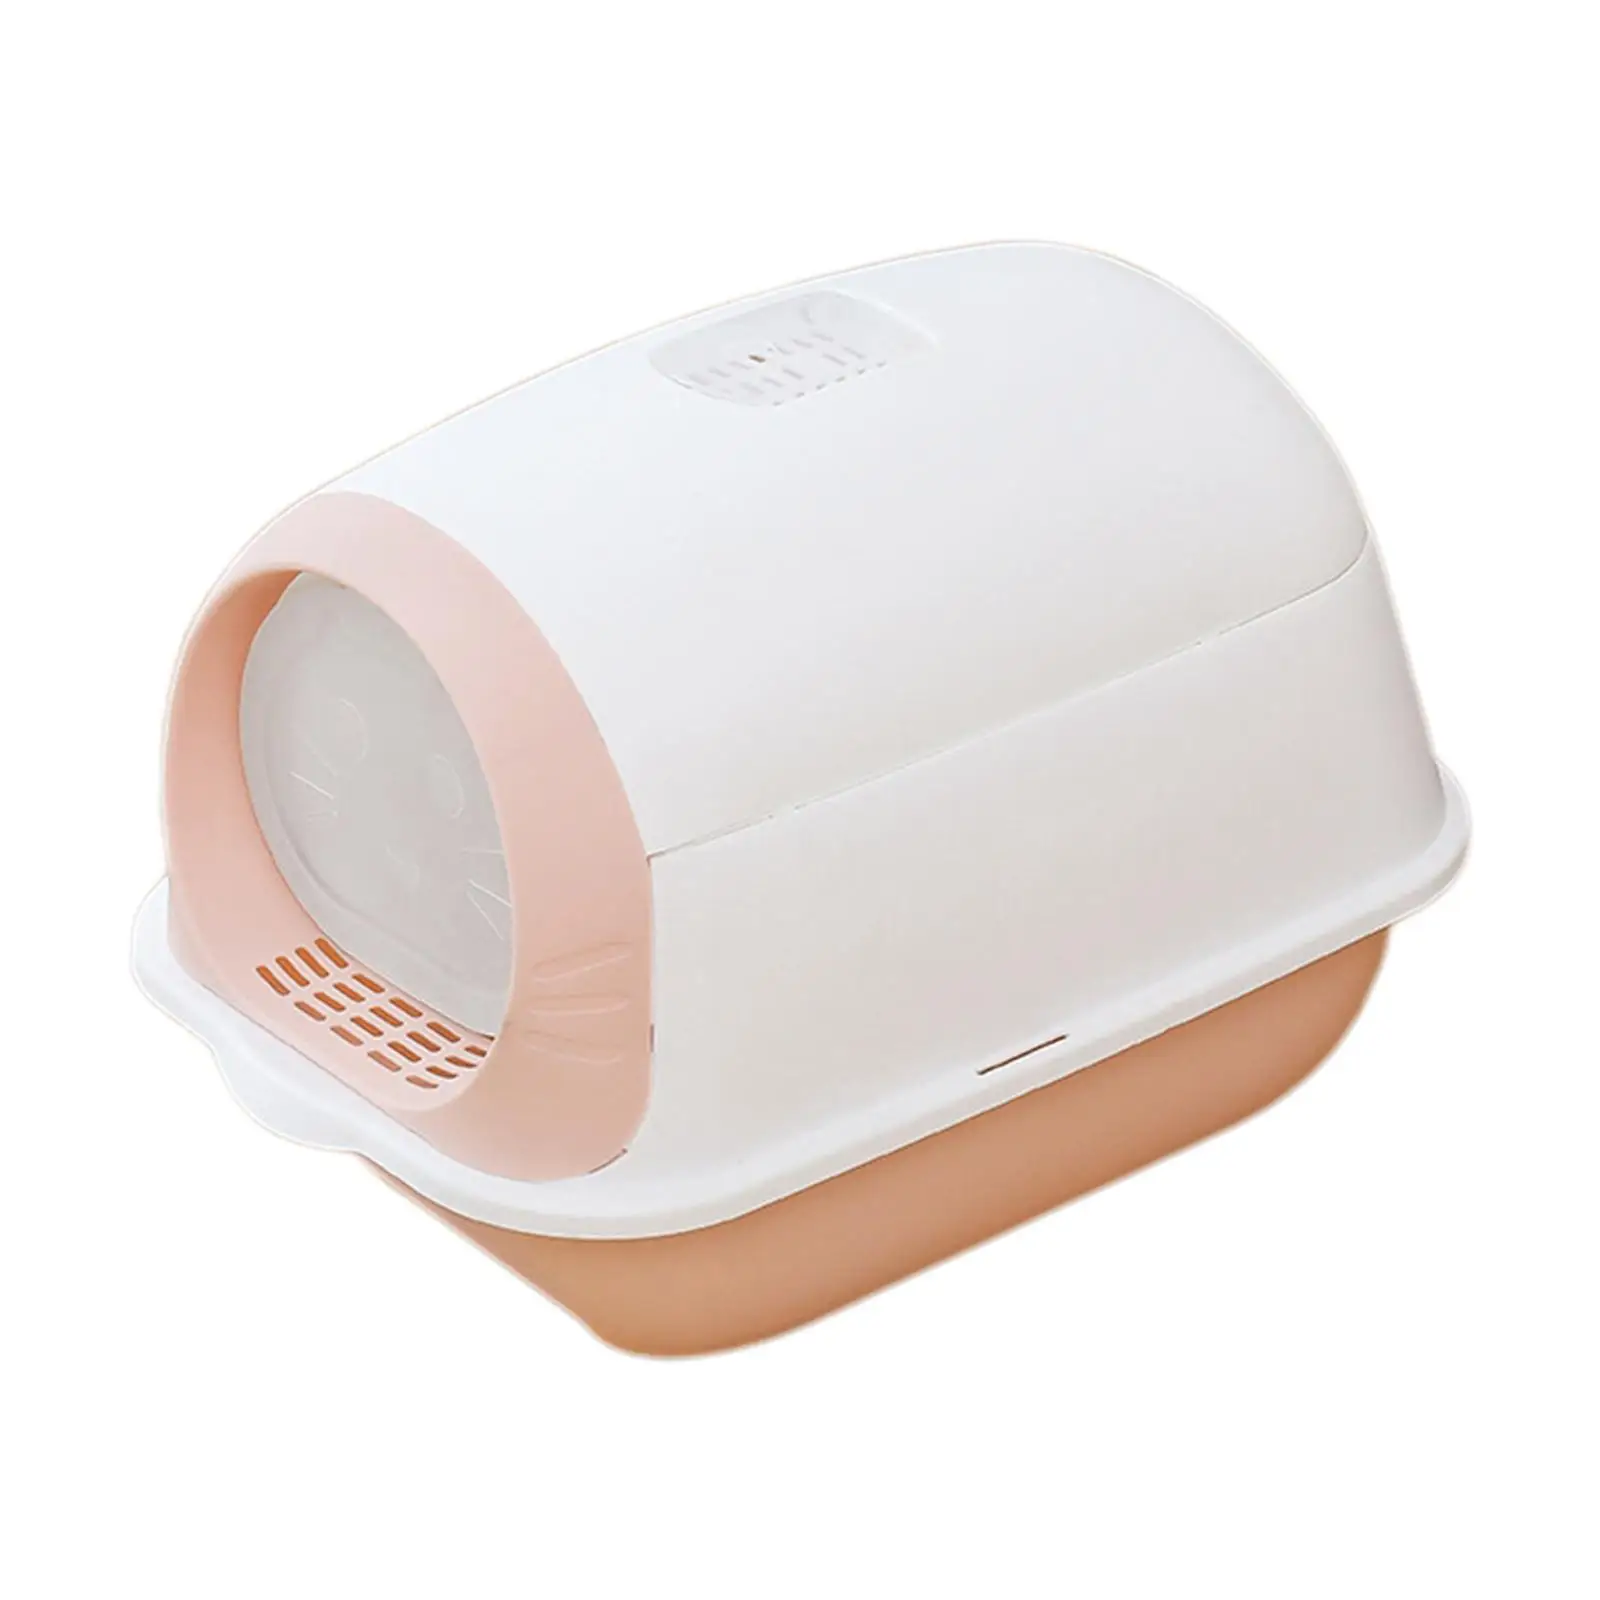 Pet Litter Tray Enclosed Potty Toilet with Gate Deep Loo Litter Pan Hooded Cat Litter Box for Rabbit Puppy Travel Kitten Kitty